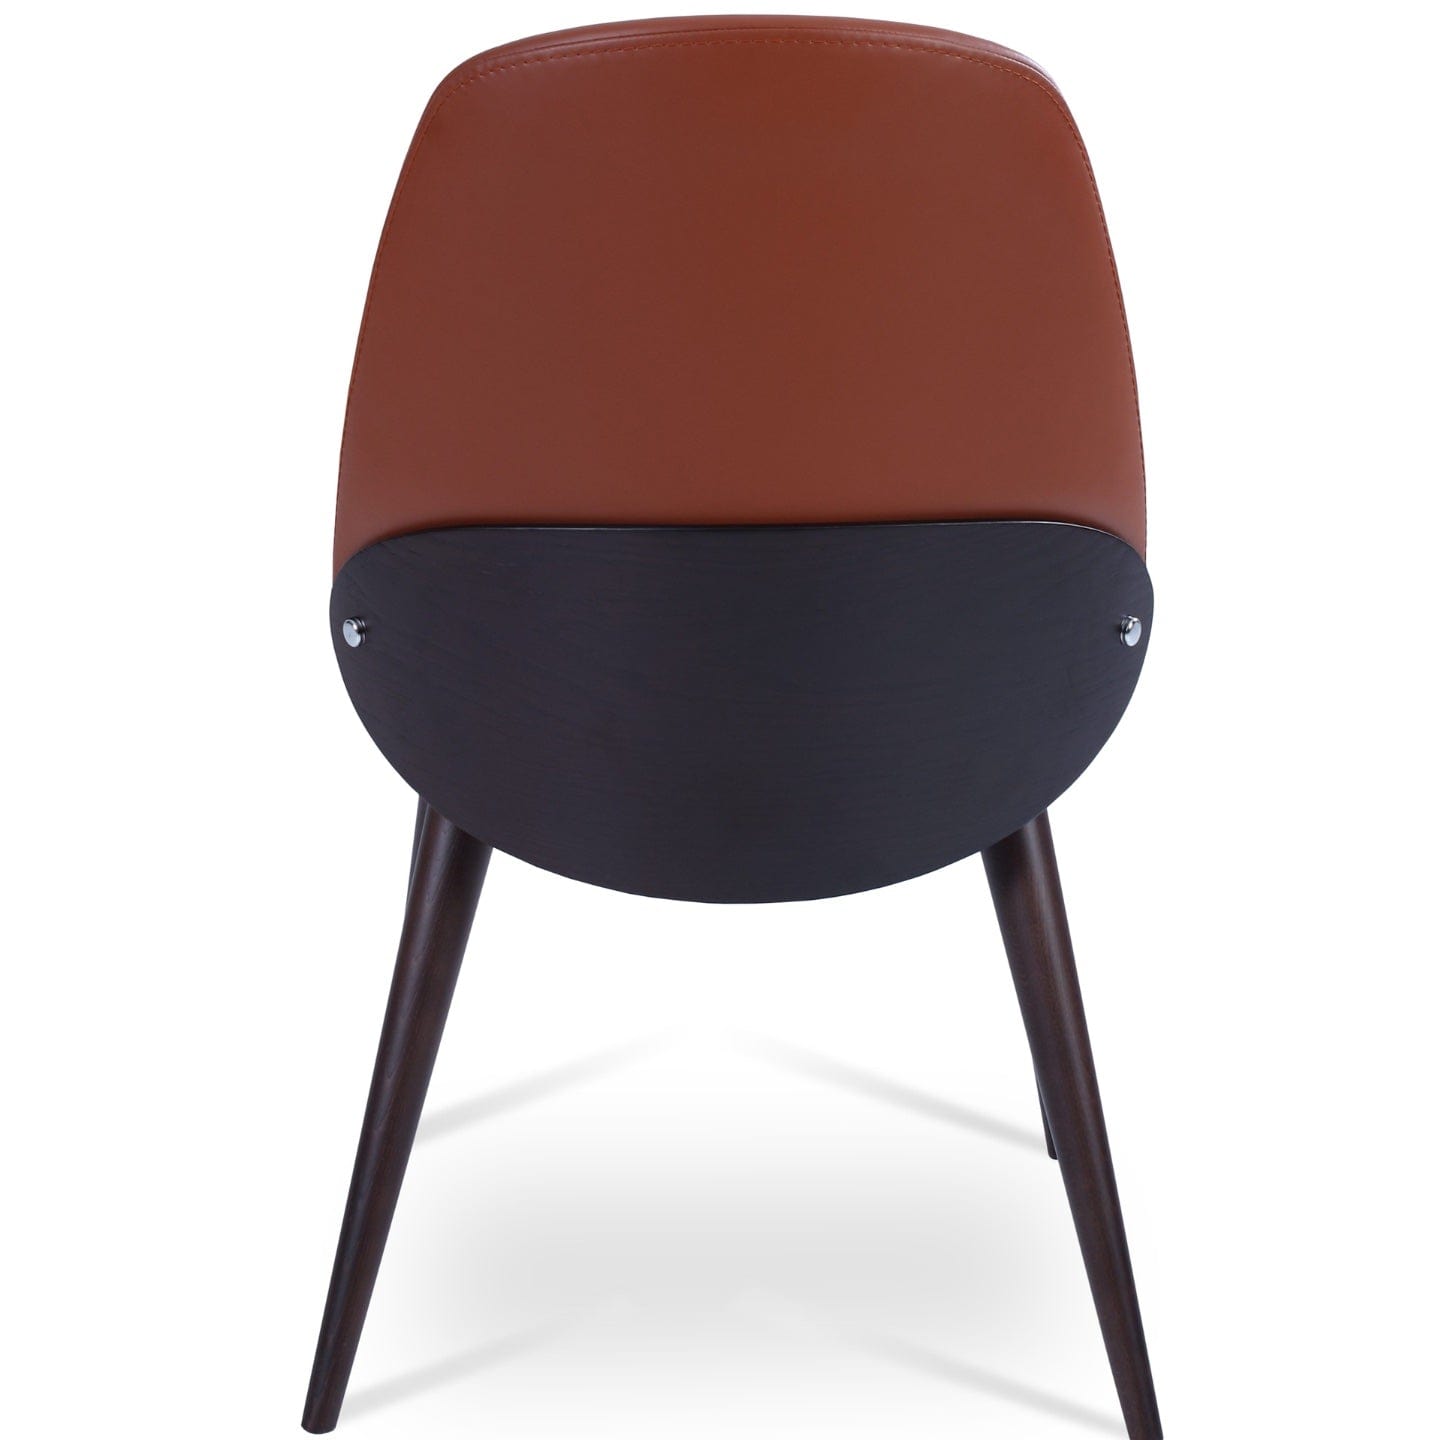 sohoConcept Kitchen & Dining Room Chairs Aston Wood Dining Chair | Brown Leather Upholstered Chair